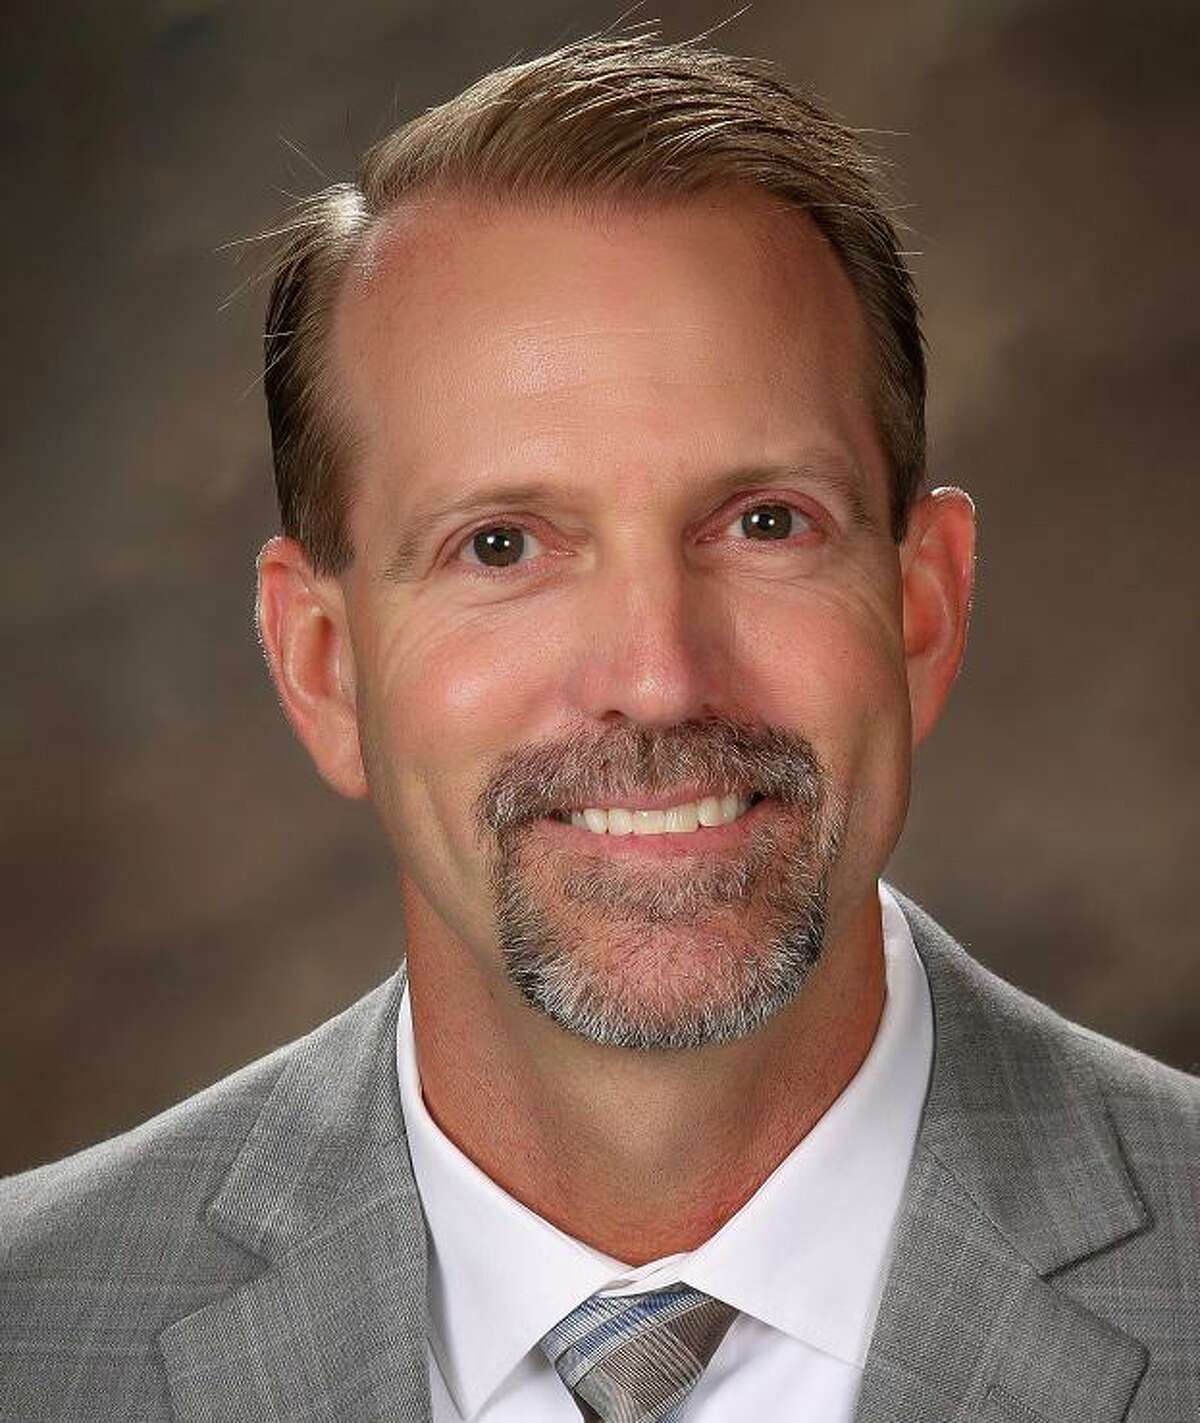 Kirk Taylor, who is associate principal at the Deer Park High School South Campus, will be principal at Deer Park High School North Campus for the 2020-2021 school term.